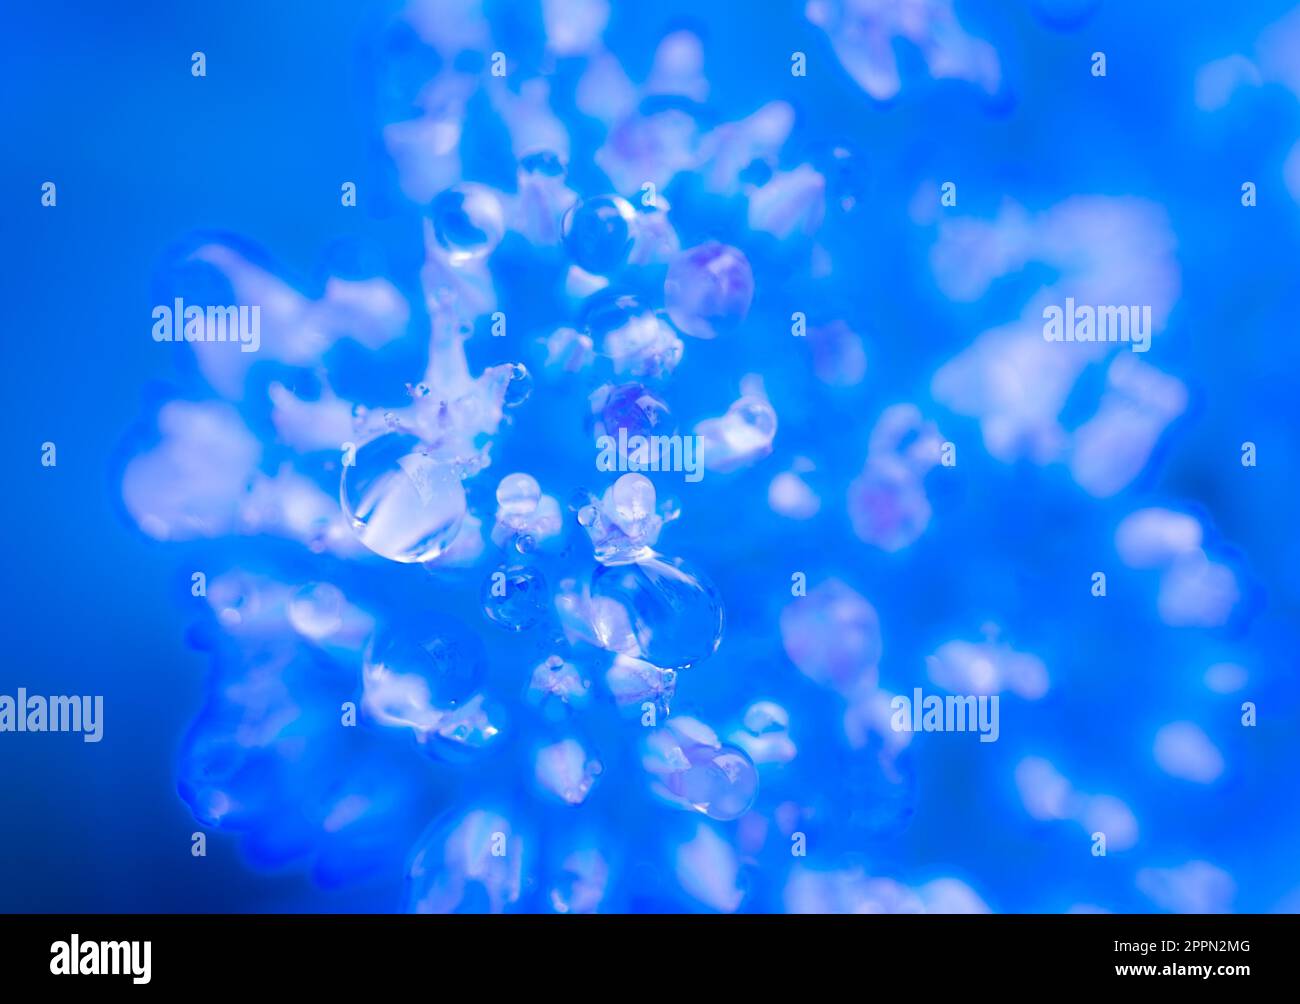 Abstract macro background with water drops Stock Photo